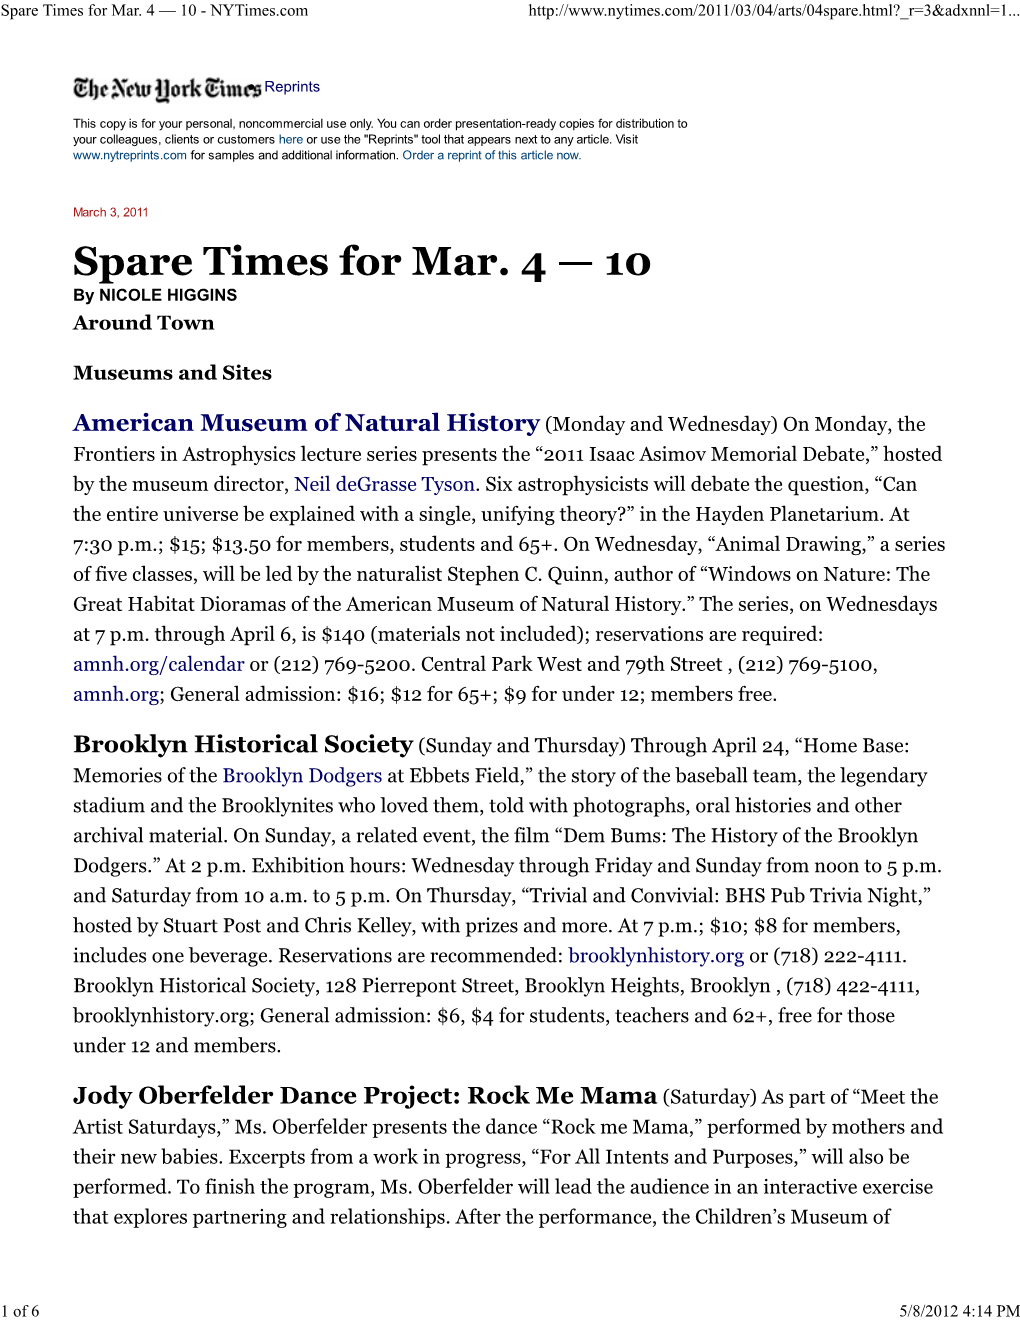 Spare Times for Mar. 4 — 10 - Nytimes.Com